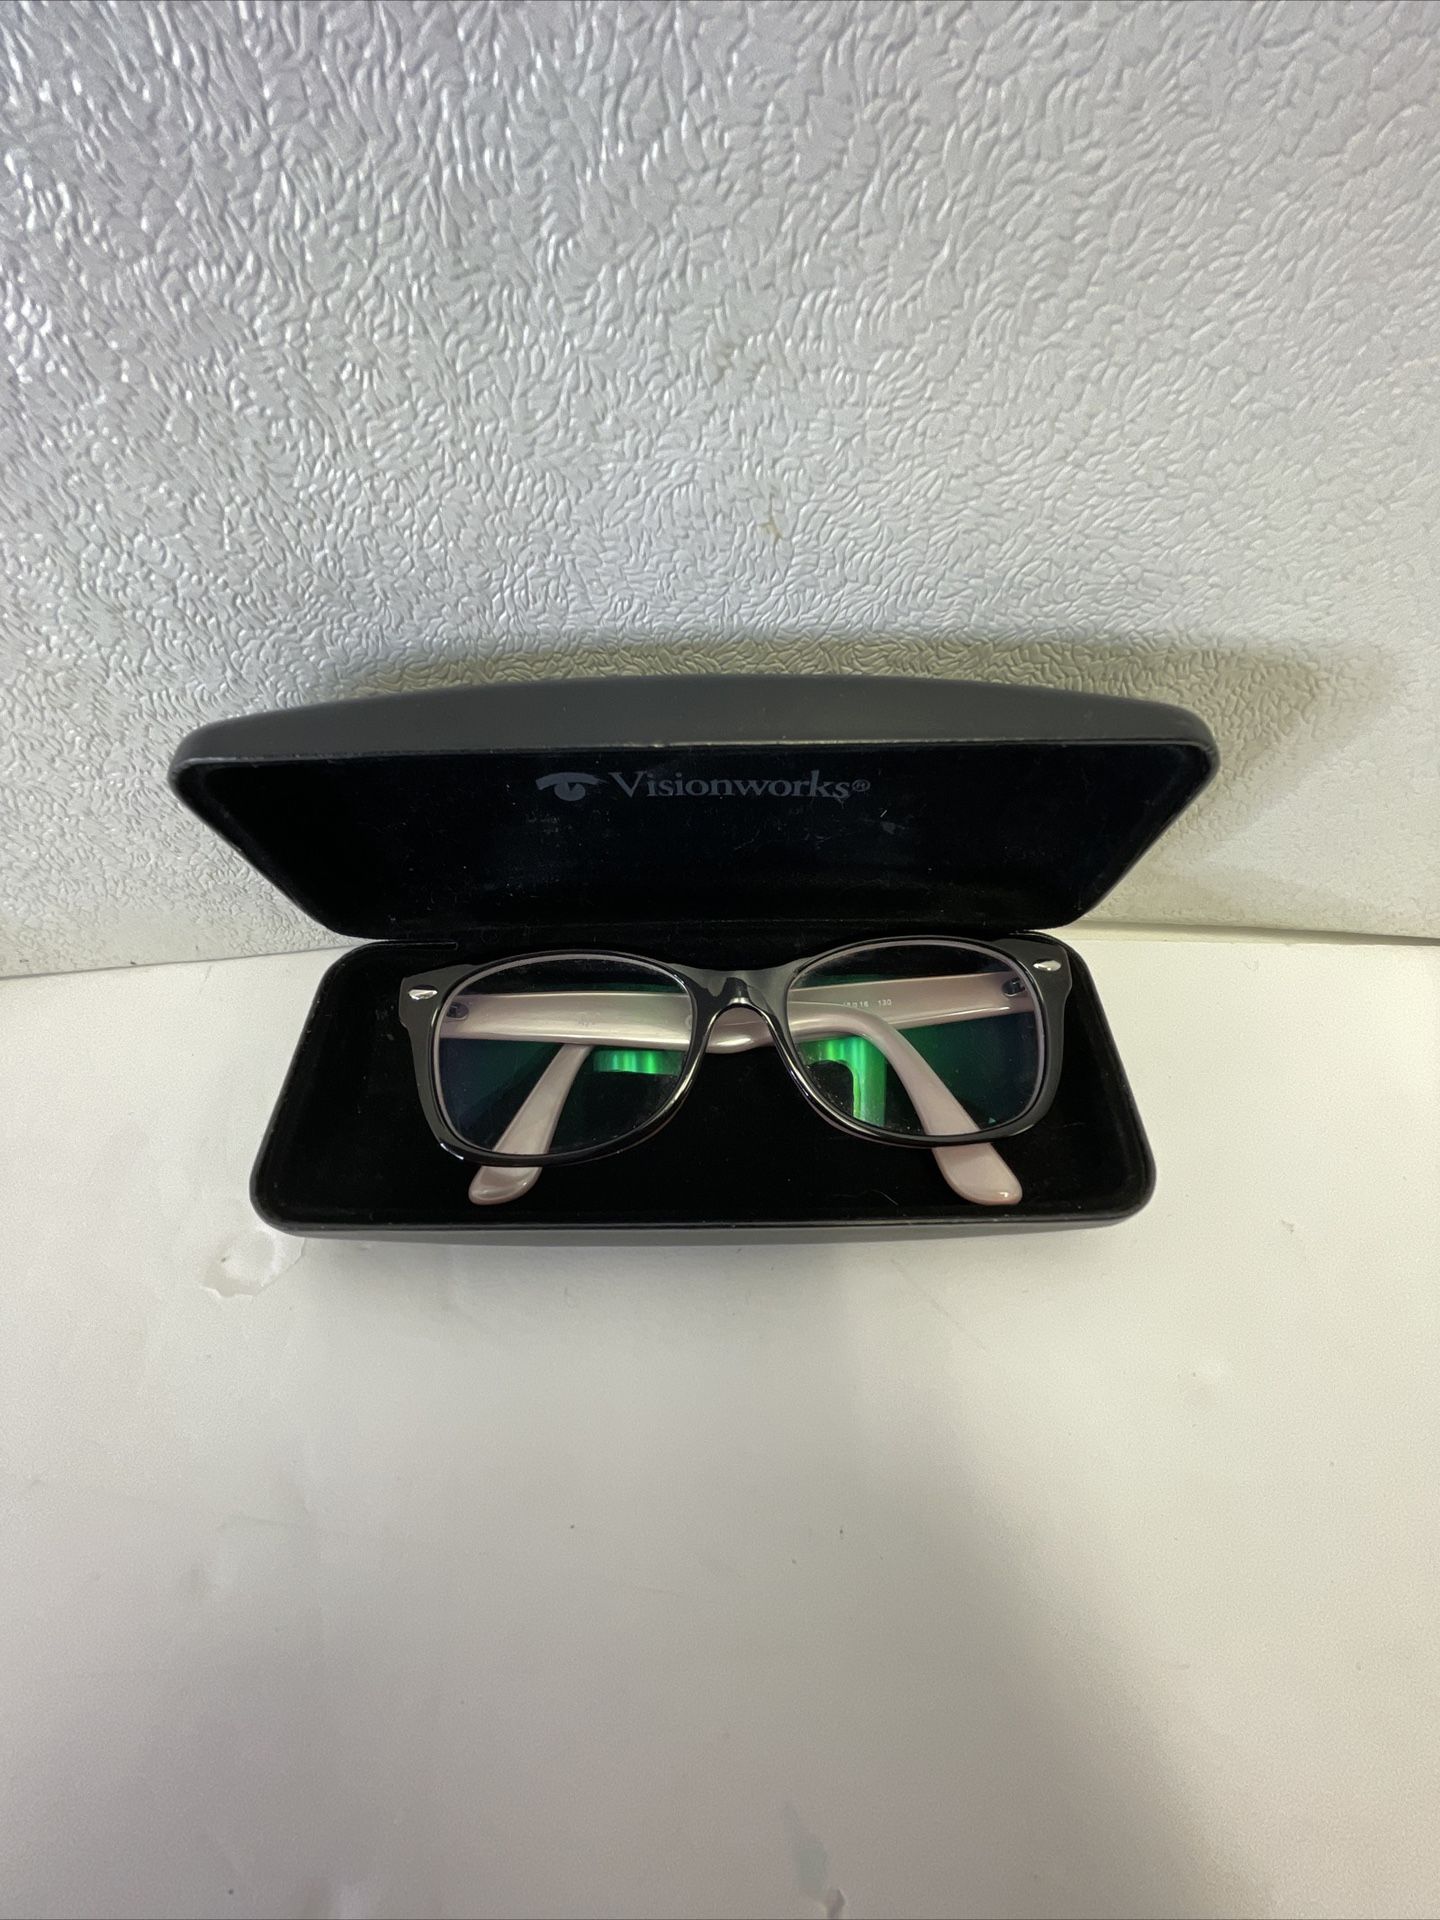 RAY BAN Pink / Black Girls Eyeglasses Frames RB 1(contact info removed) 48-16-130 Glasses Case